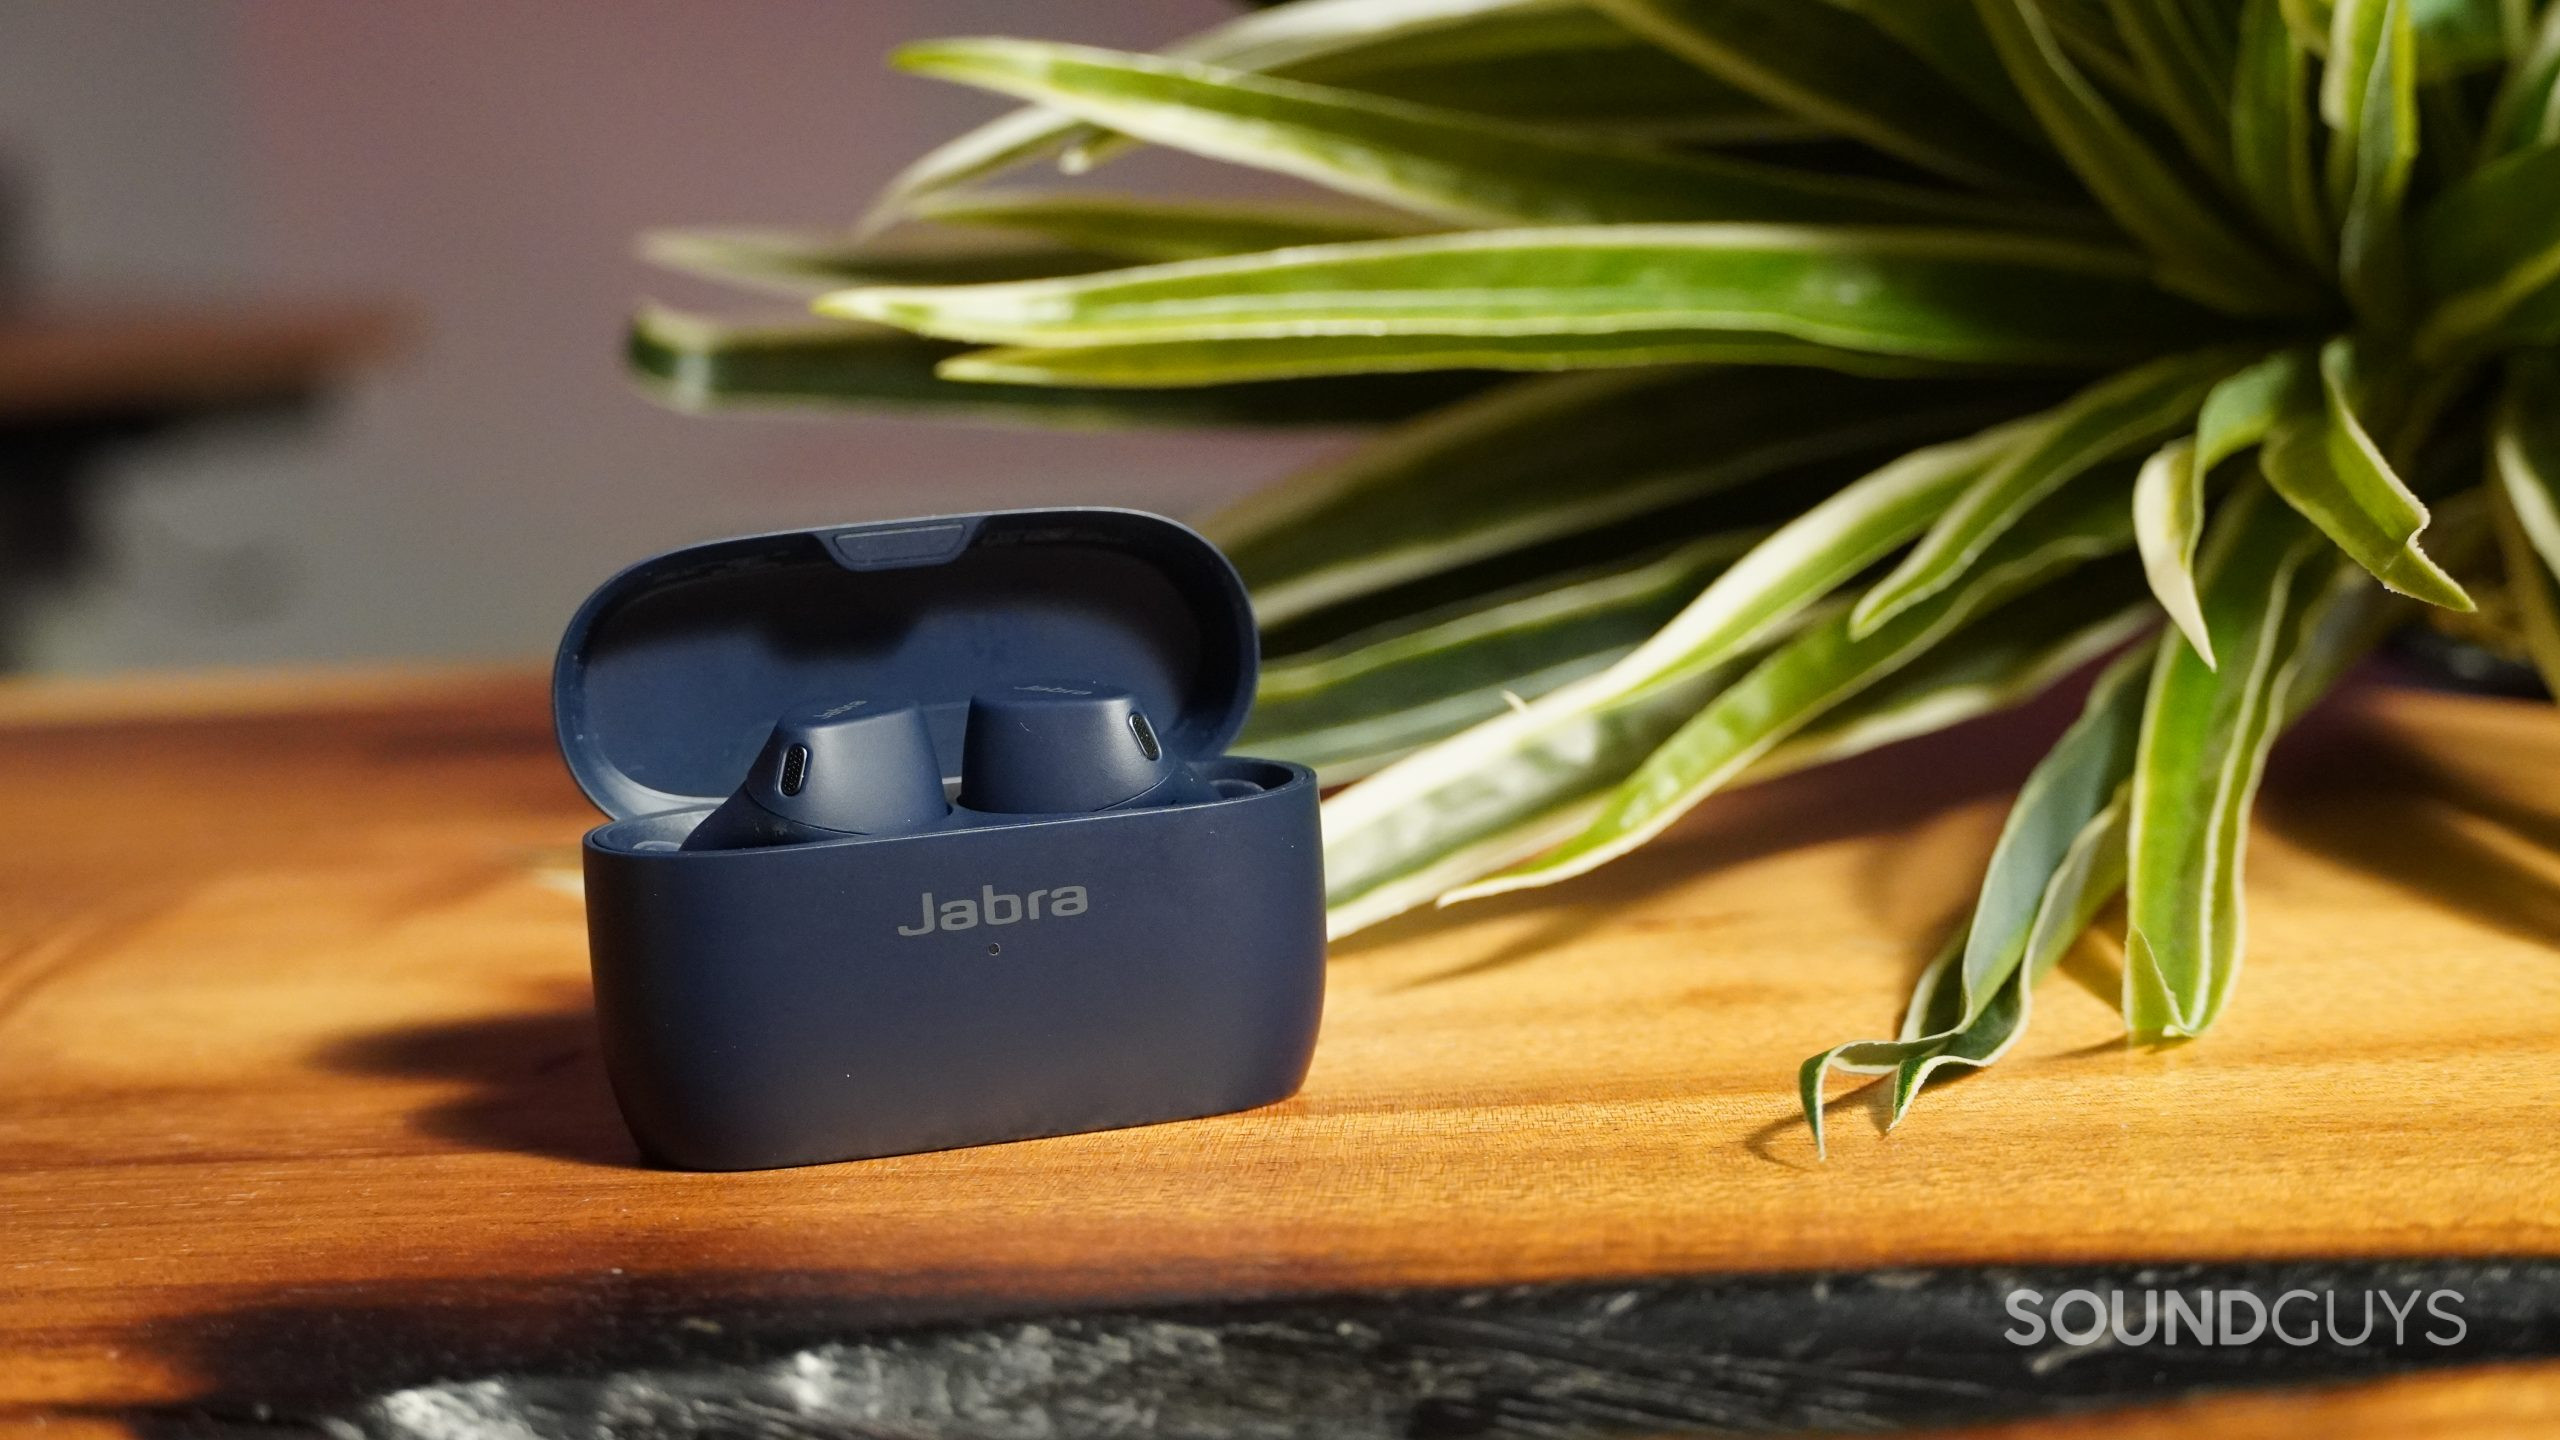 Jabra Elite 4 Active earbuds on table next to plant with red light in background.